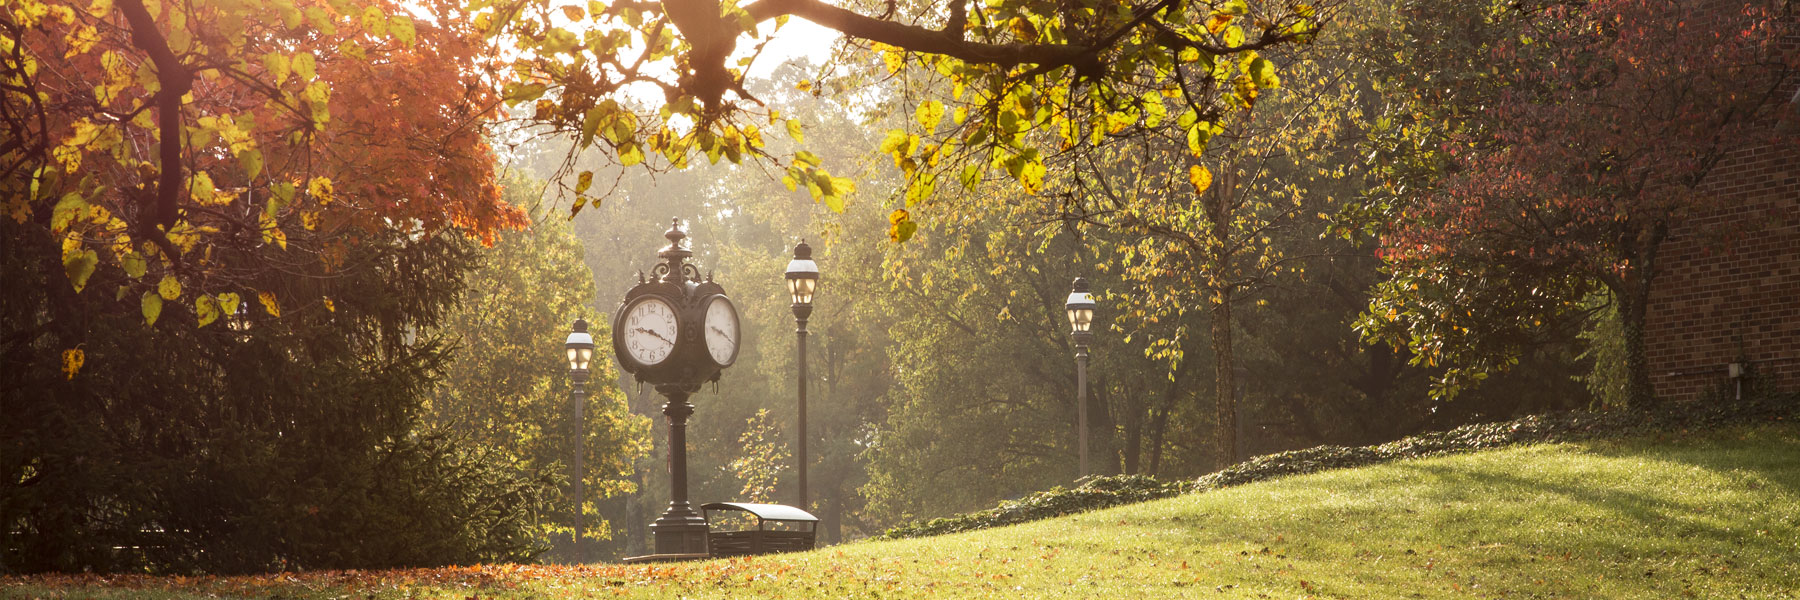 IU Southeast's McCullough plaza clock tower surrounded by lamp posts and fall leaves